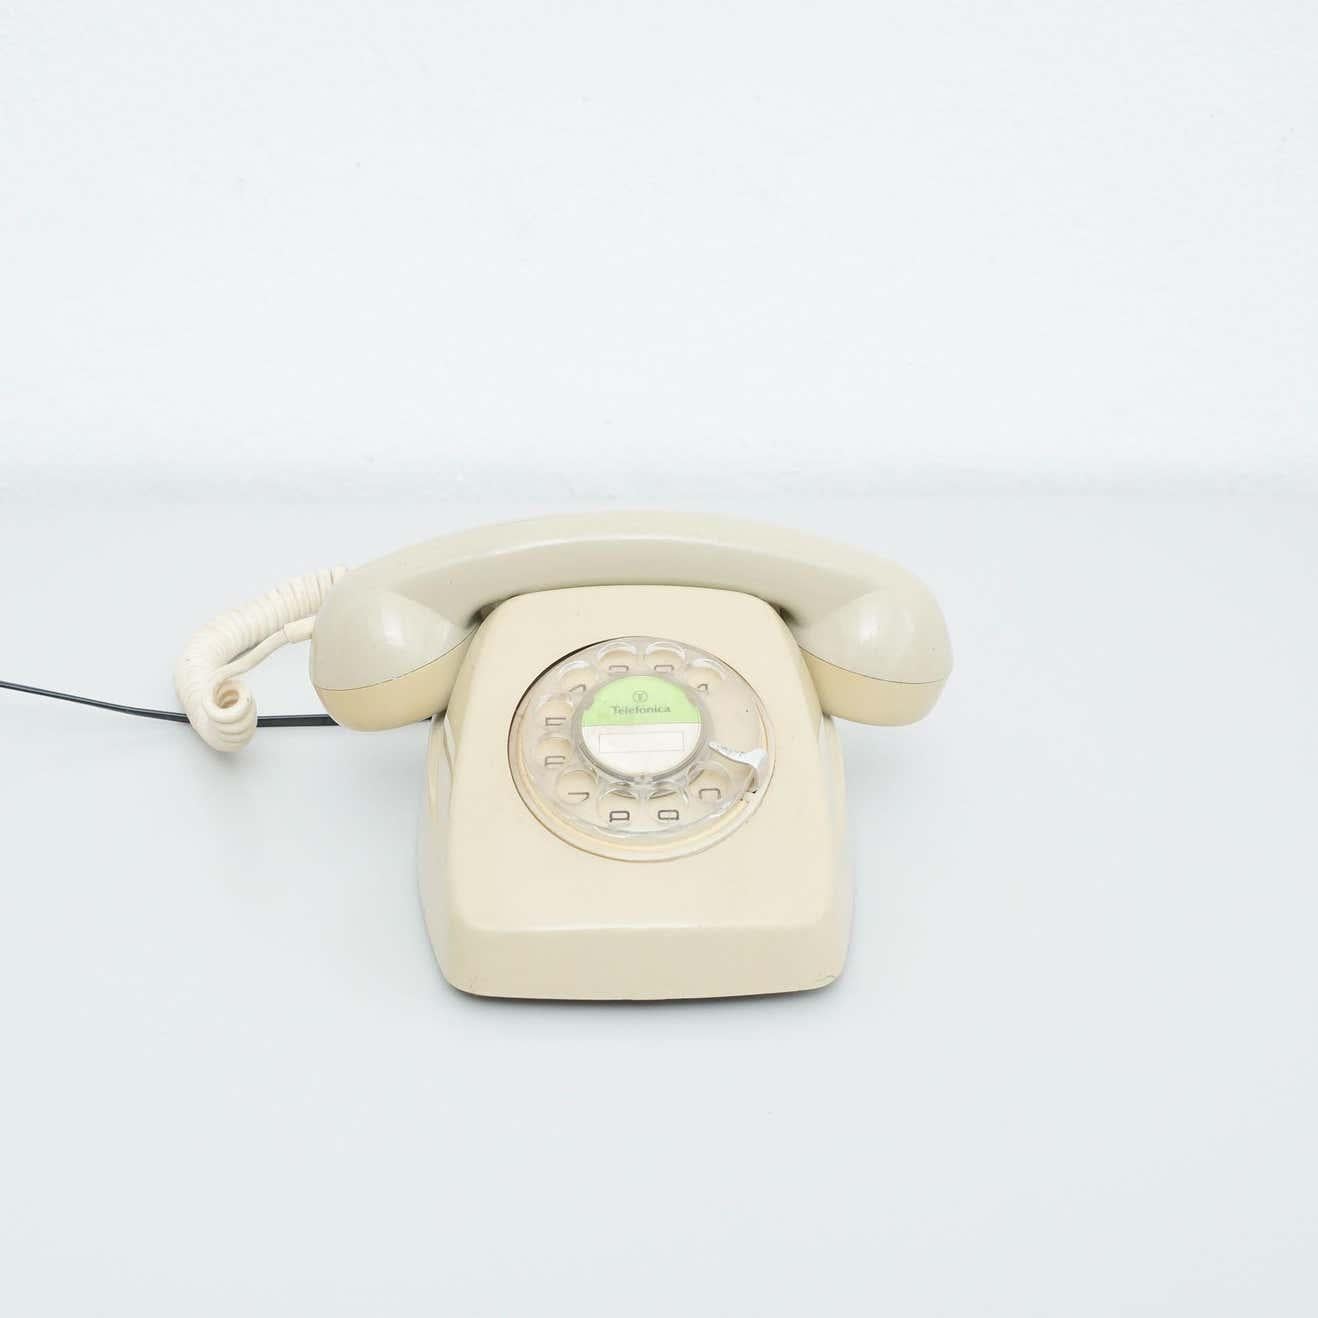 Vintage Analog Telephone manufactured by Telefonica from Spain, circa 1980.

In original condition, with minor wear consistent with age and use, preserving a beautiful patina.

Materials:
Plastic

Dimensions:
D 22 cm x W 24 cm x H 13 cm.